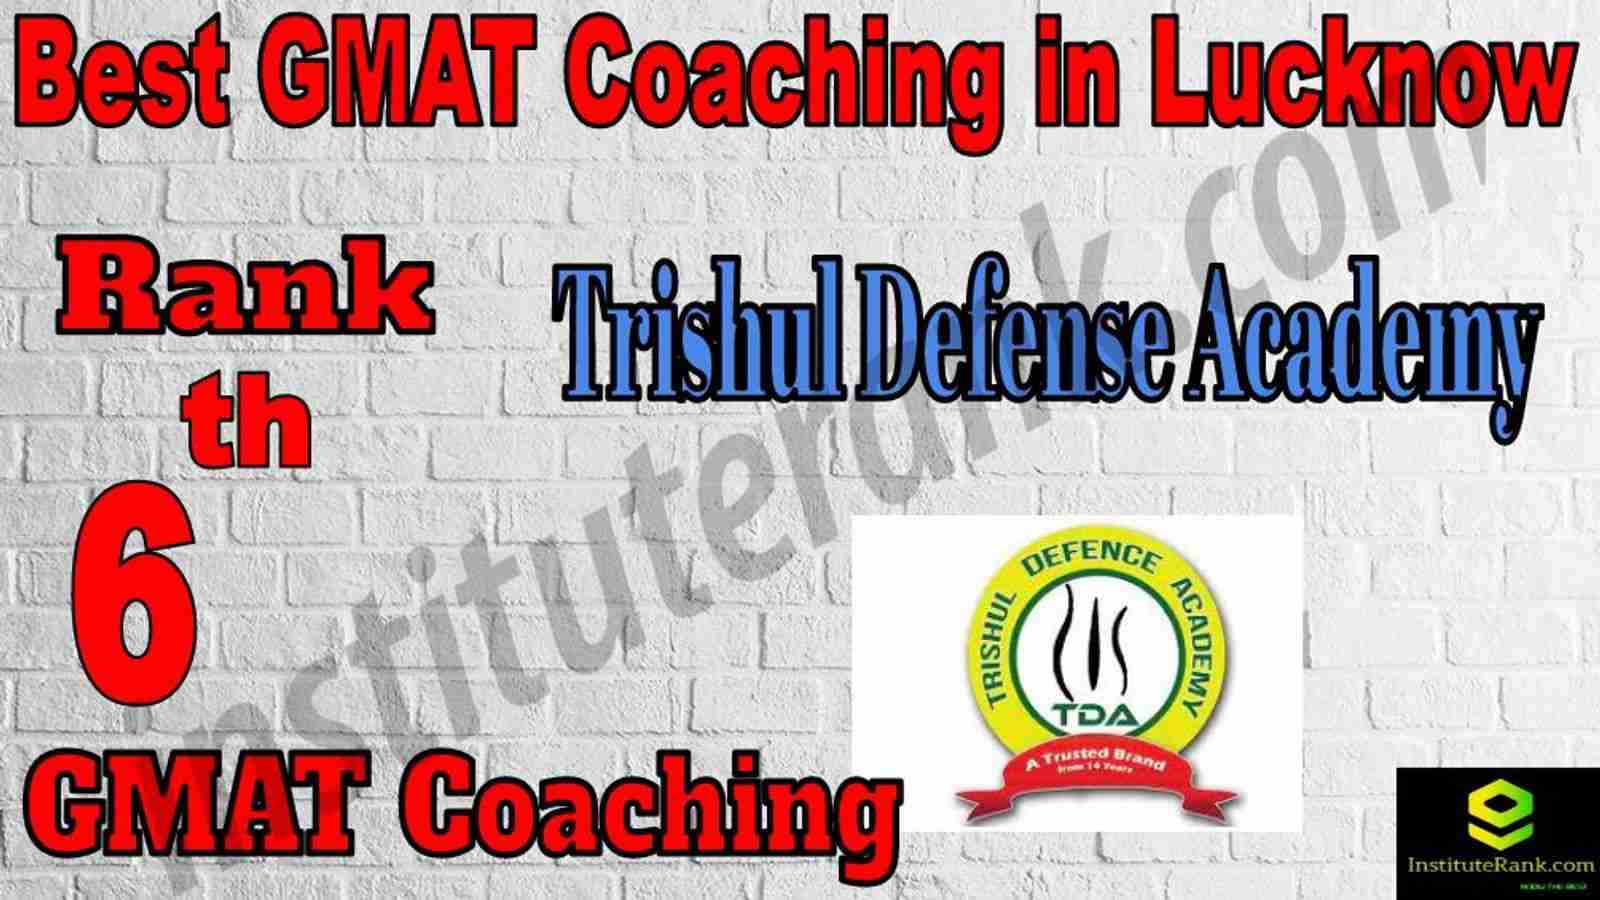 6th Best GMAT Coaching in Lucknow